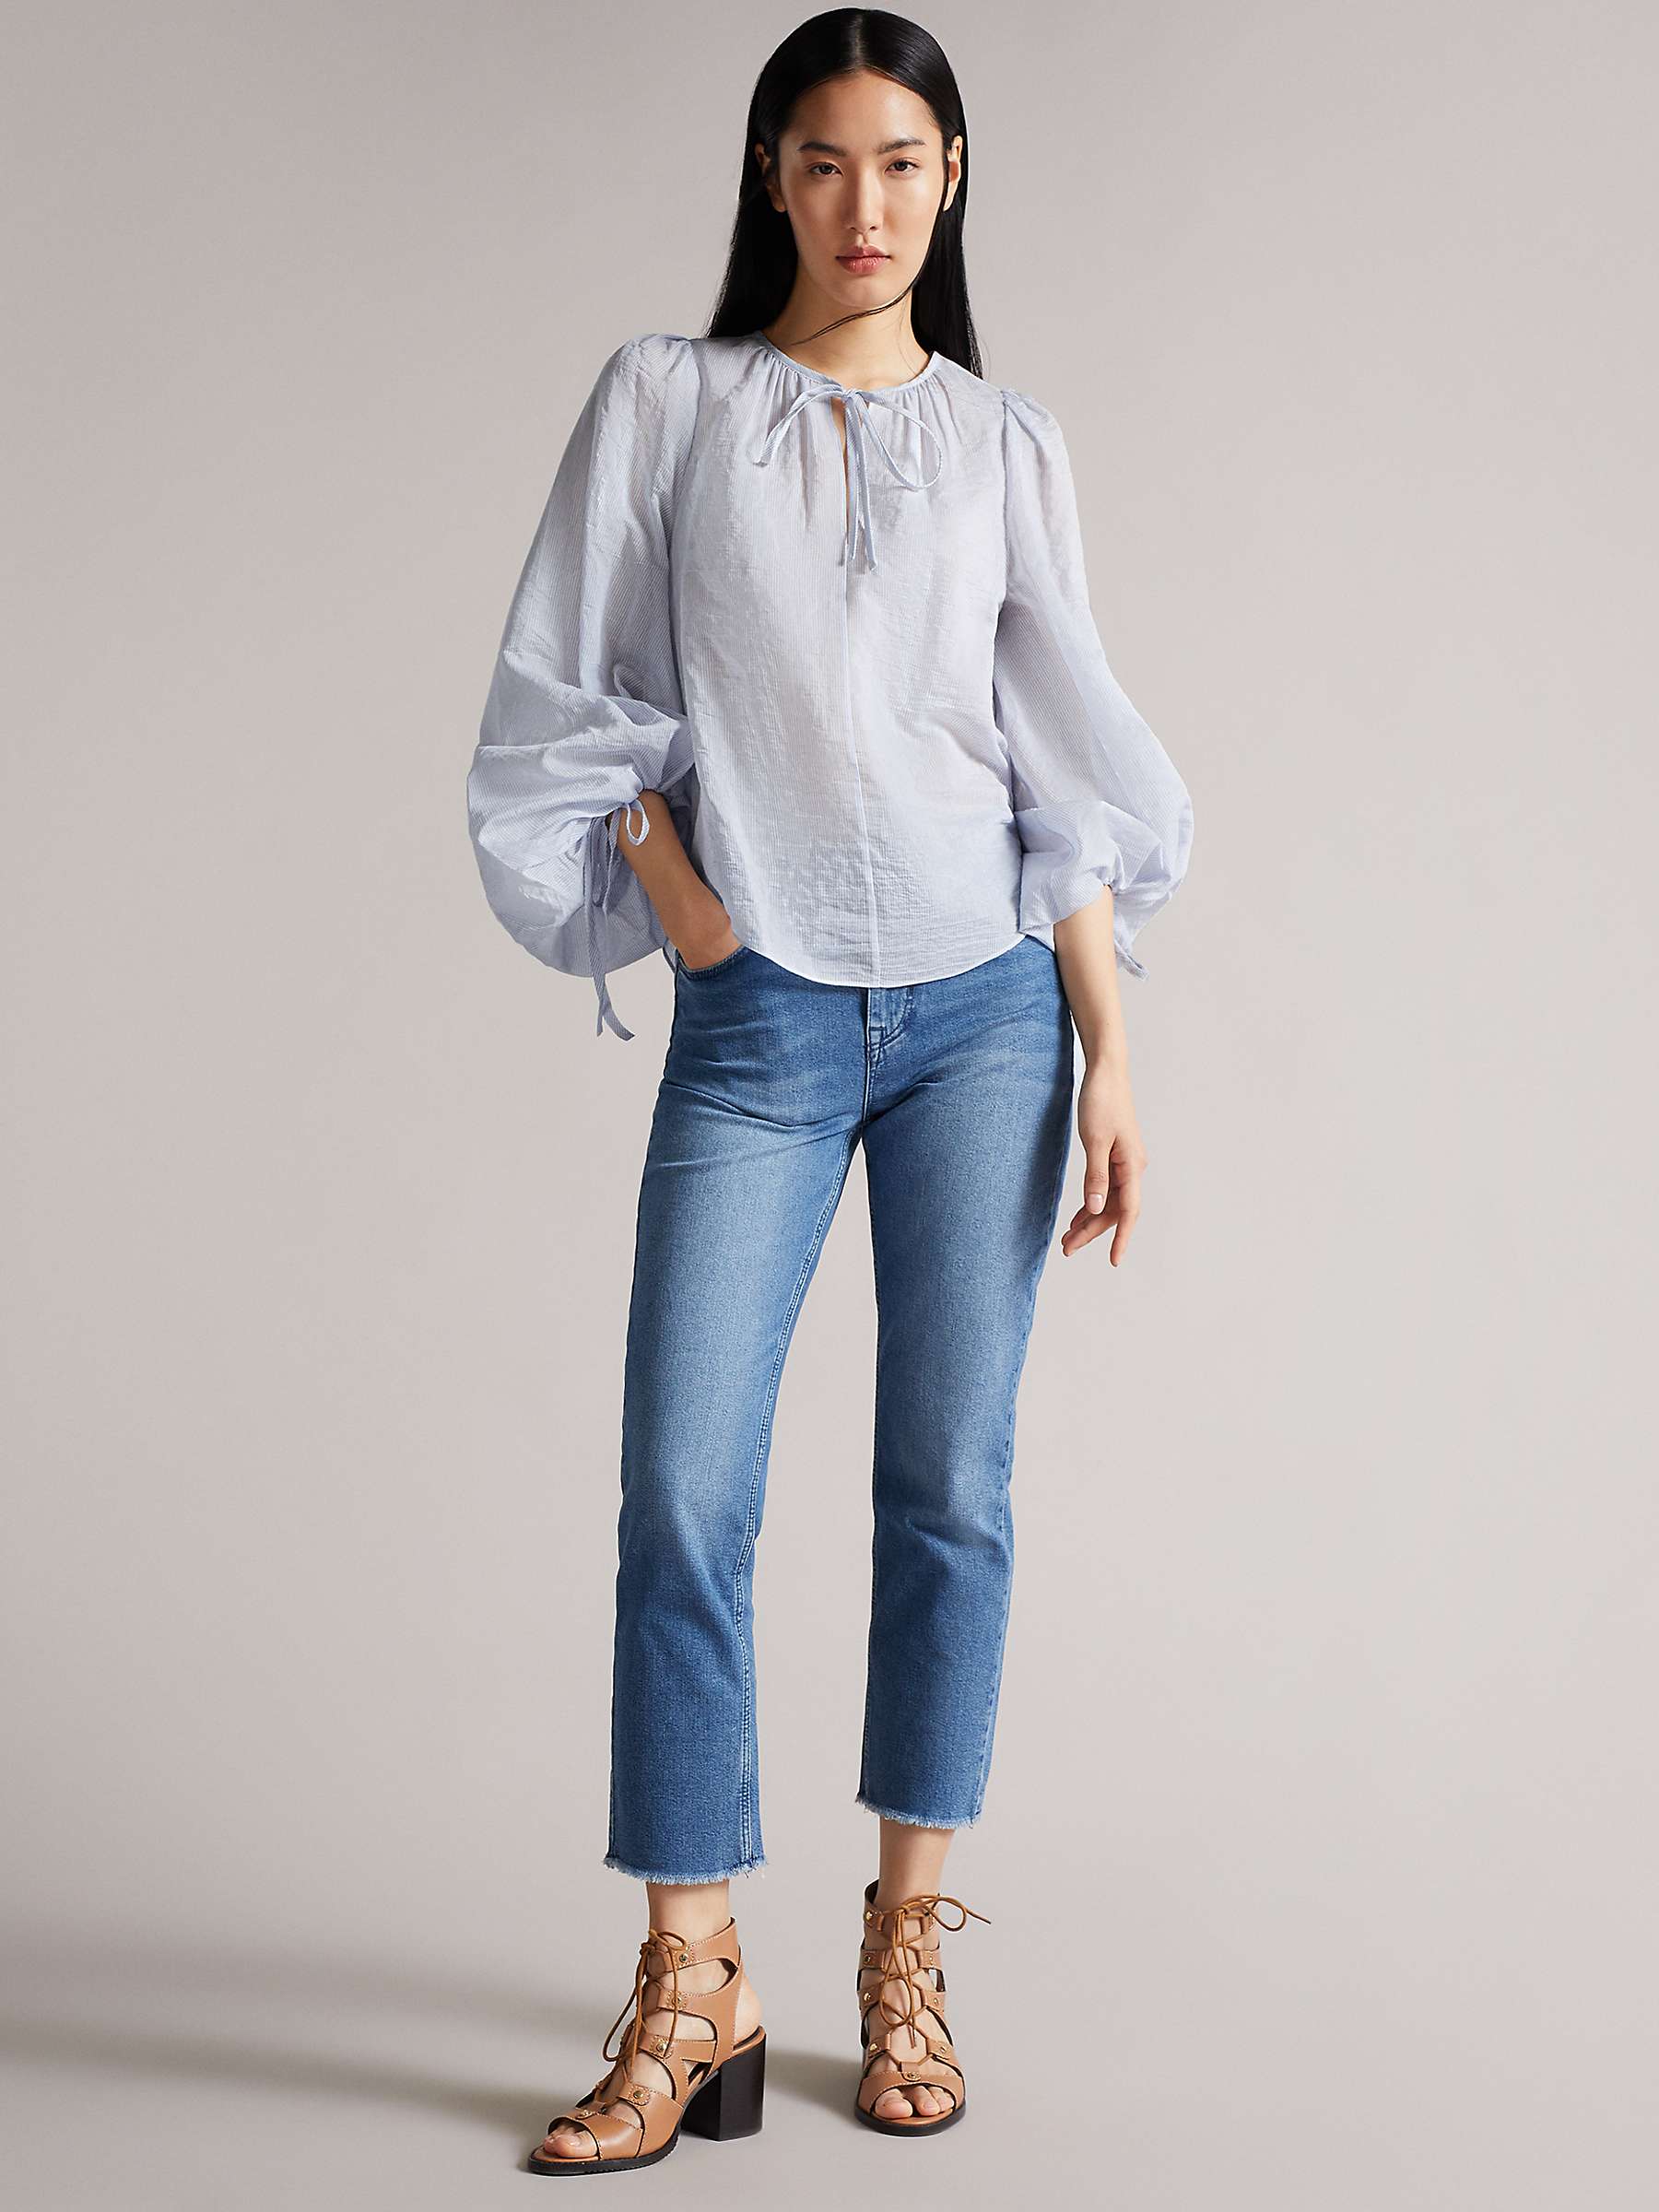 Ted Baker Silana Puff Sleeve Blouse, Pale Blue at John Lewis & Partners